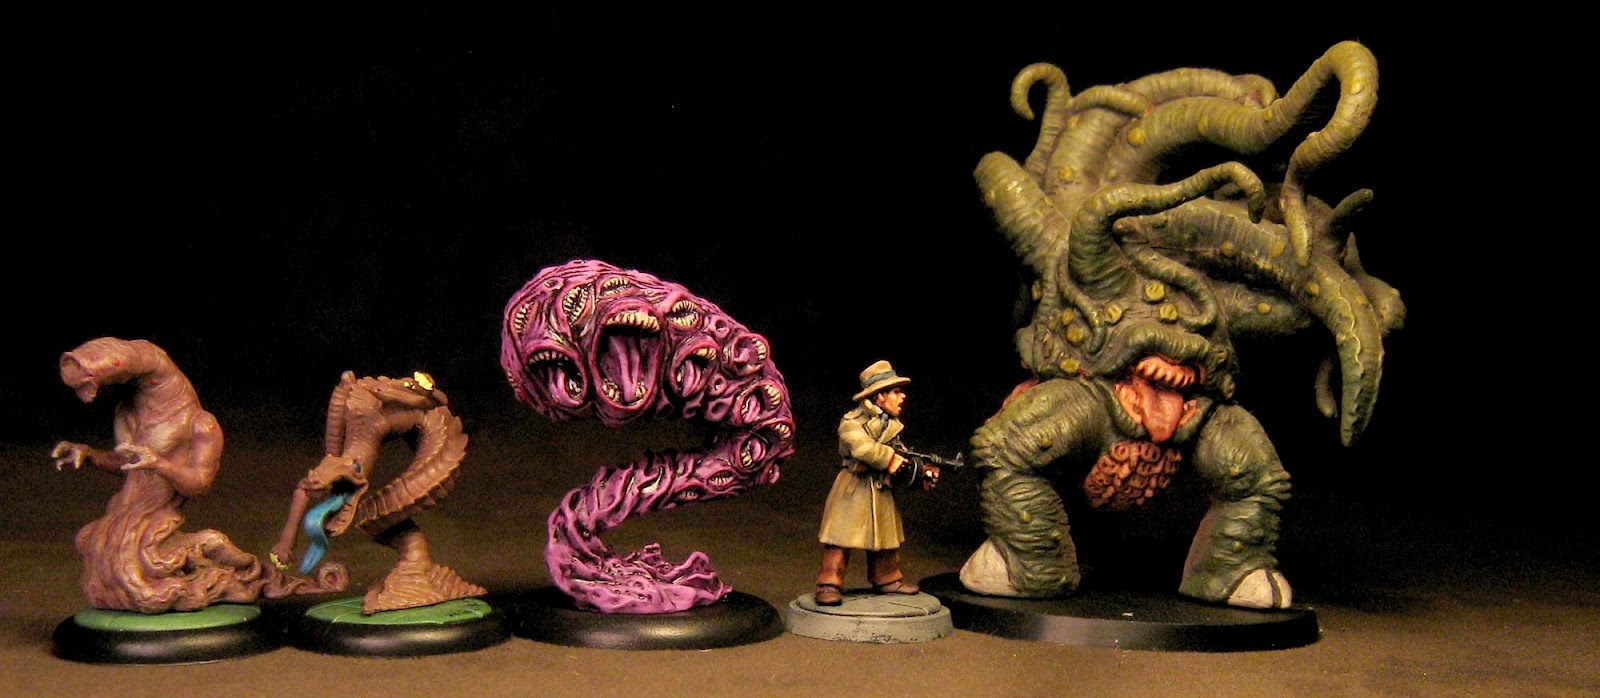 Cthonian Miniature Cthulhu Lovecraft FFG Mansions of Madness Arkham Horror 